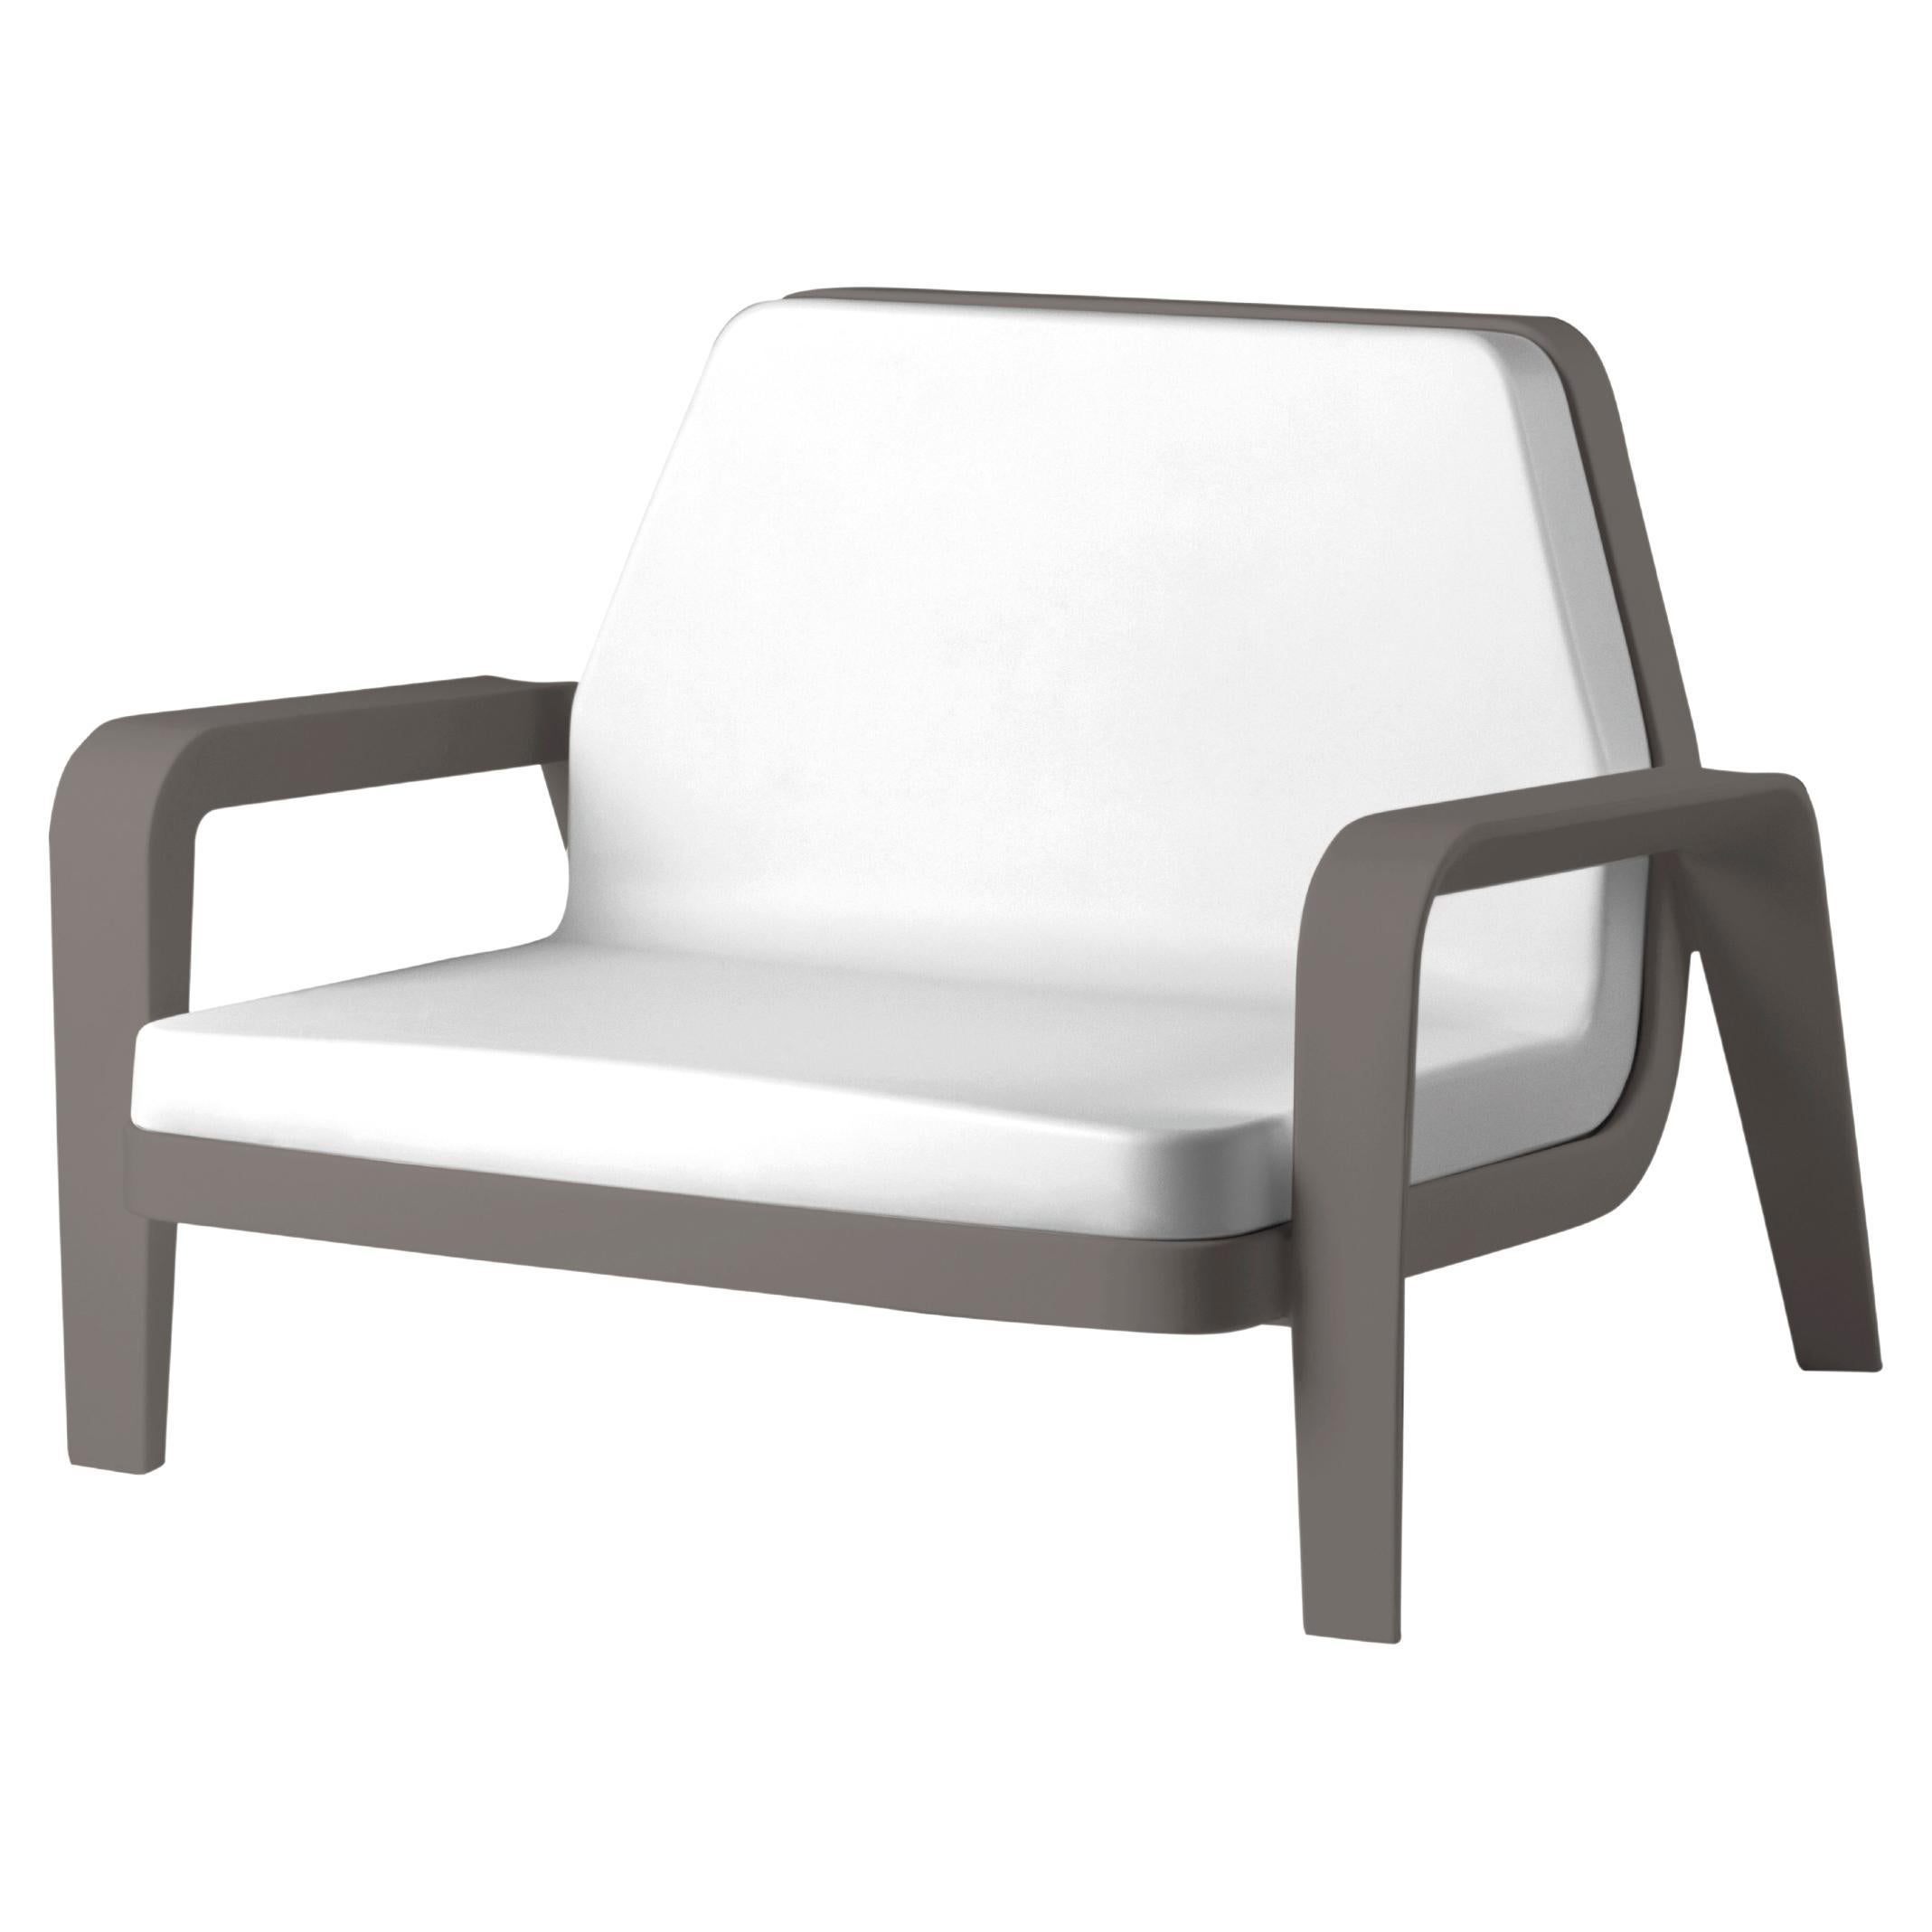 Slide Design America Armchair in Soft White Fabric with Argil Gray Frame For Sale